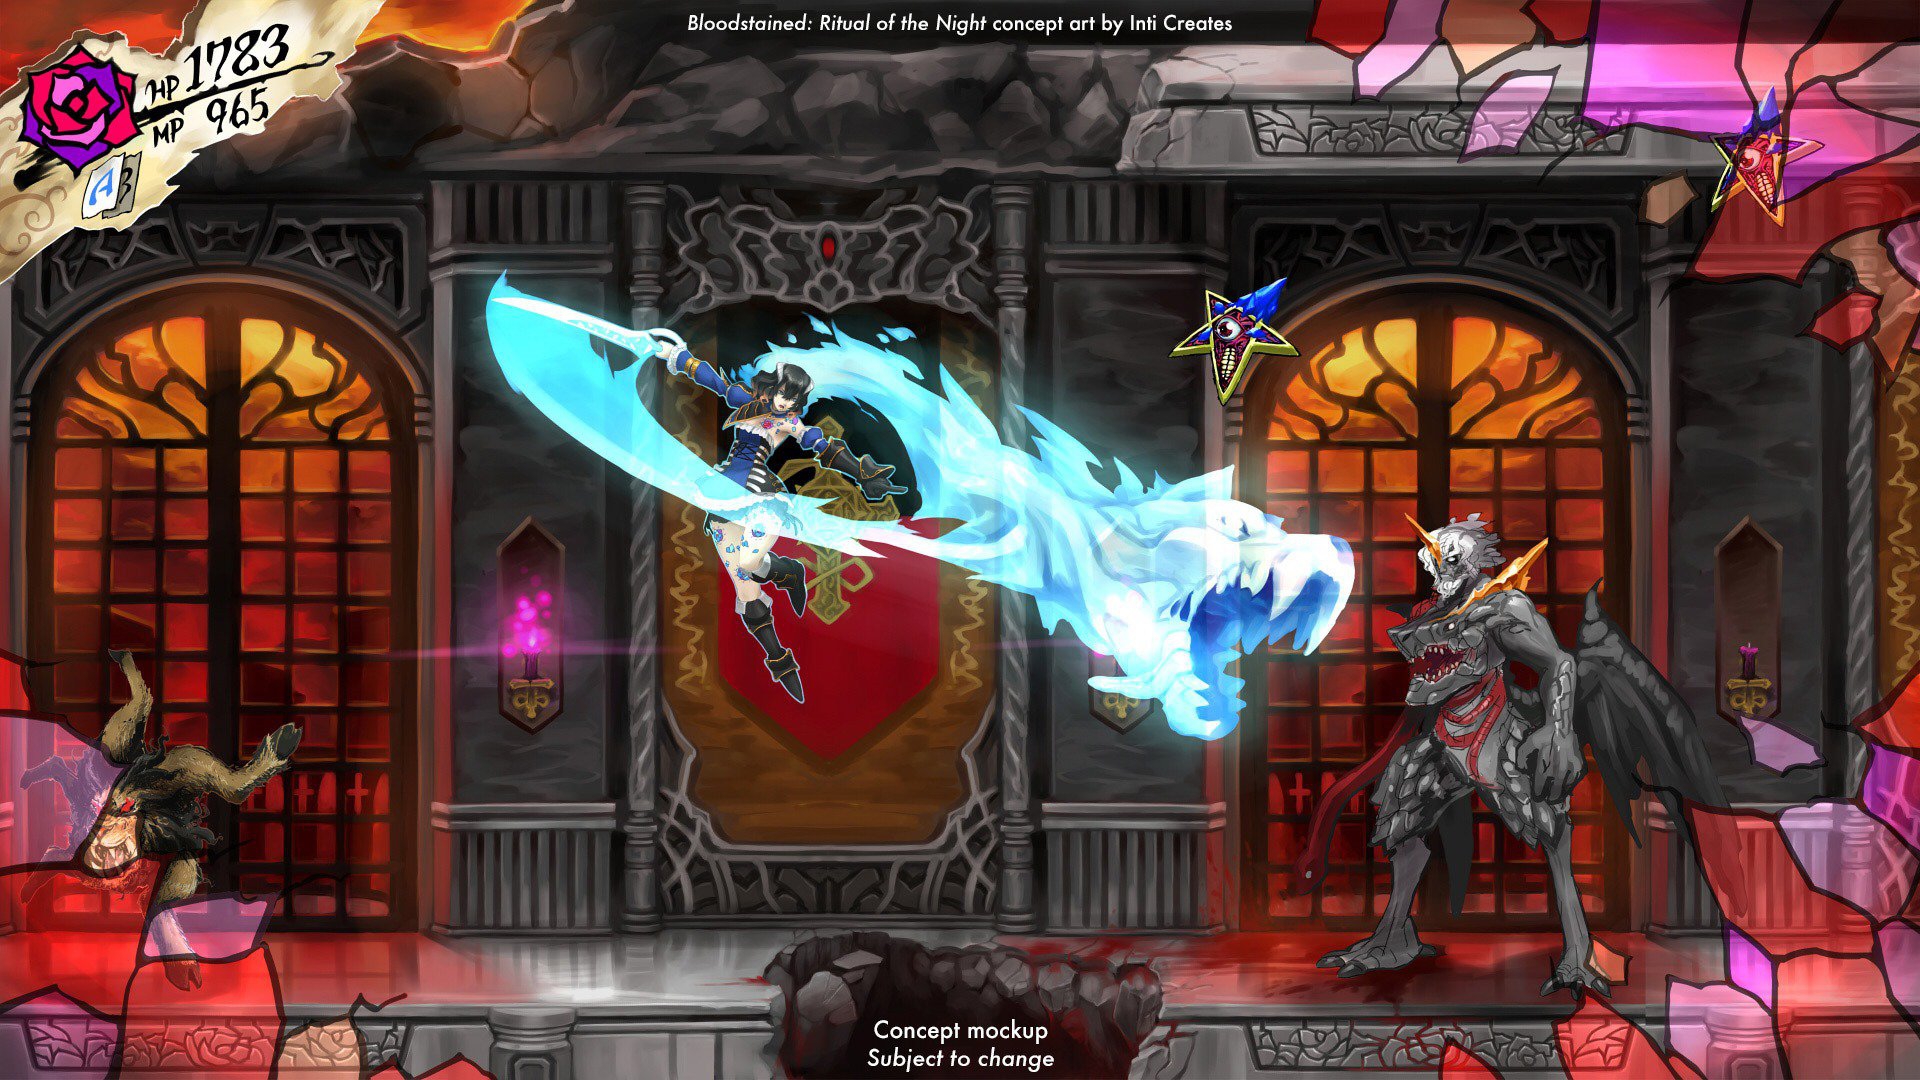 Castlevania Producer Koji Igarashi Is Back With Bloodstained Images, Photos, Reviews